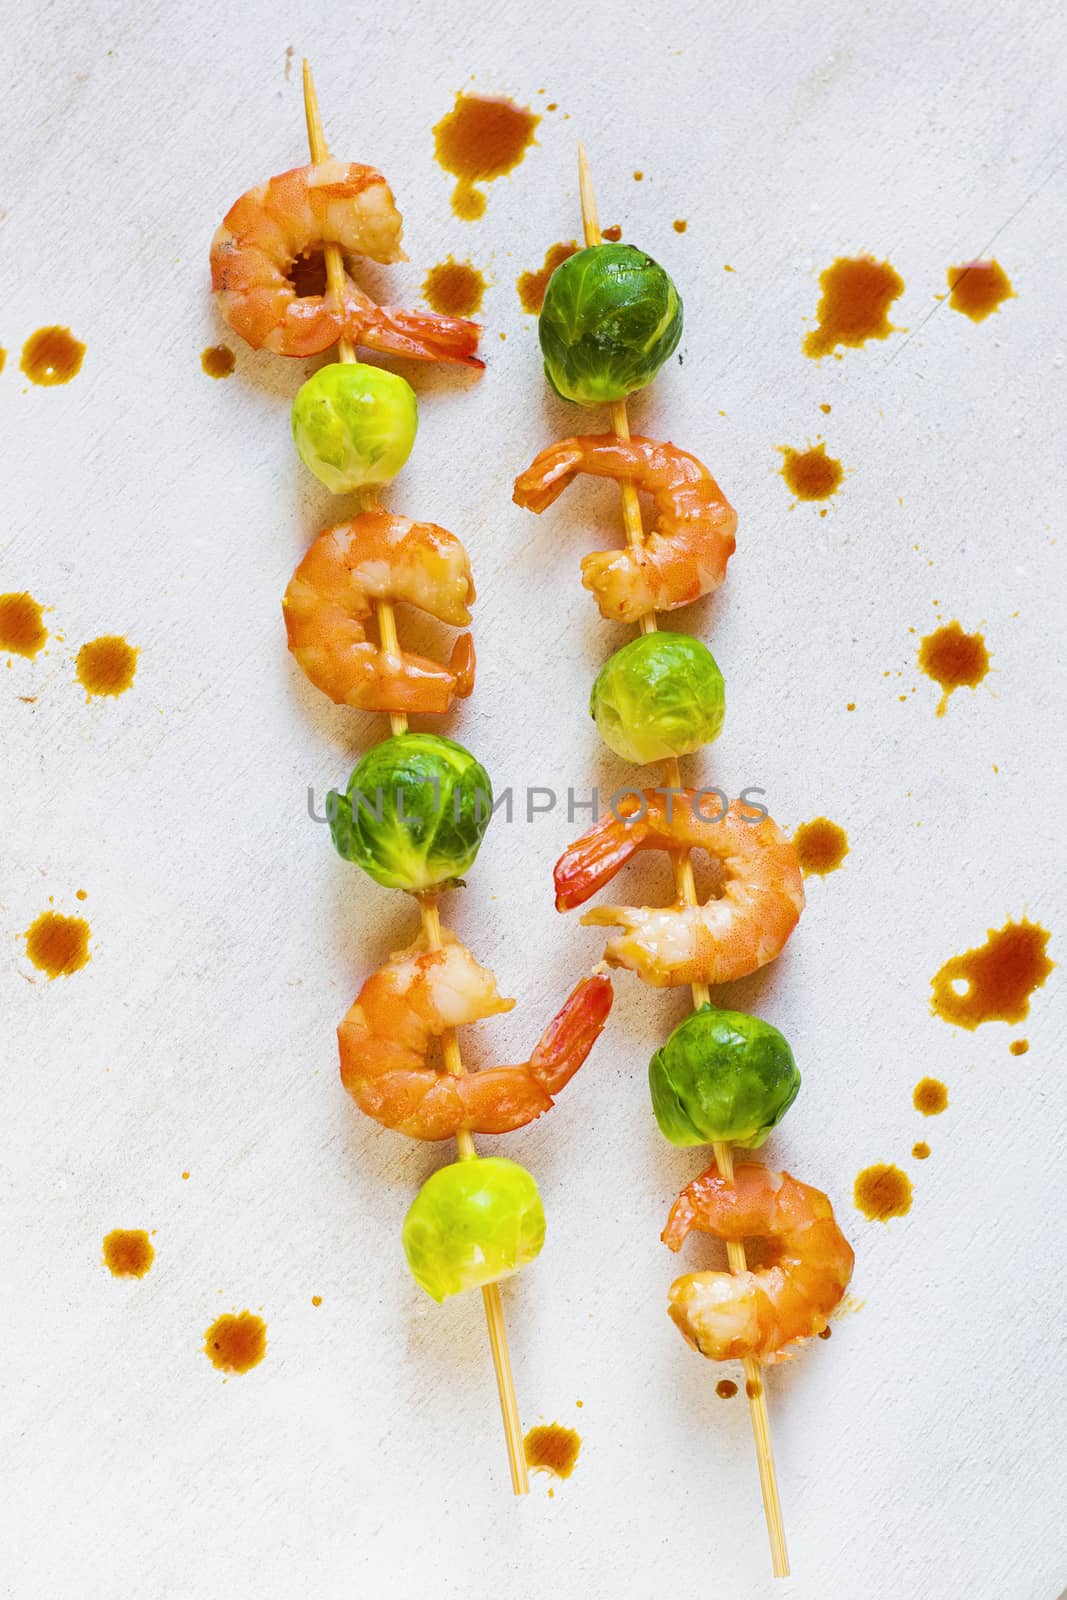 Shrimps and cabbage kebab with souse and lemon, on the table, studio shot. Seafood photography.